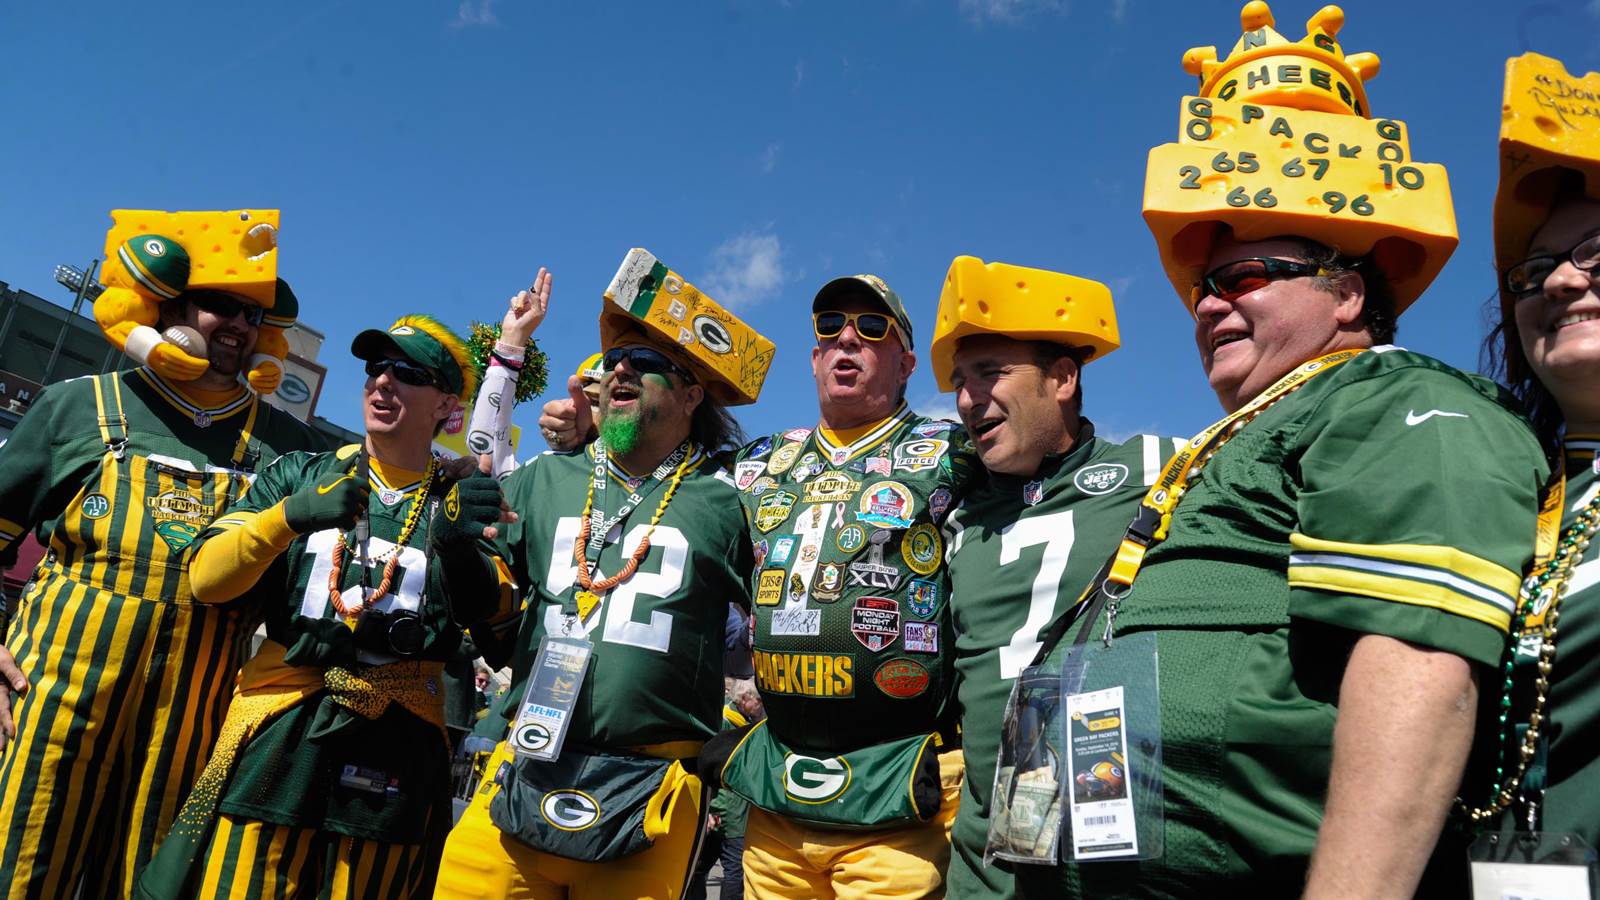 https://www.premiumseatsusa.com/special-events/wp-content/uploads/2017/07/6360804789314738291664169896_PI-NFL-Packers-fans-tailgating-091714-1.jpg